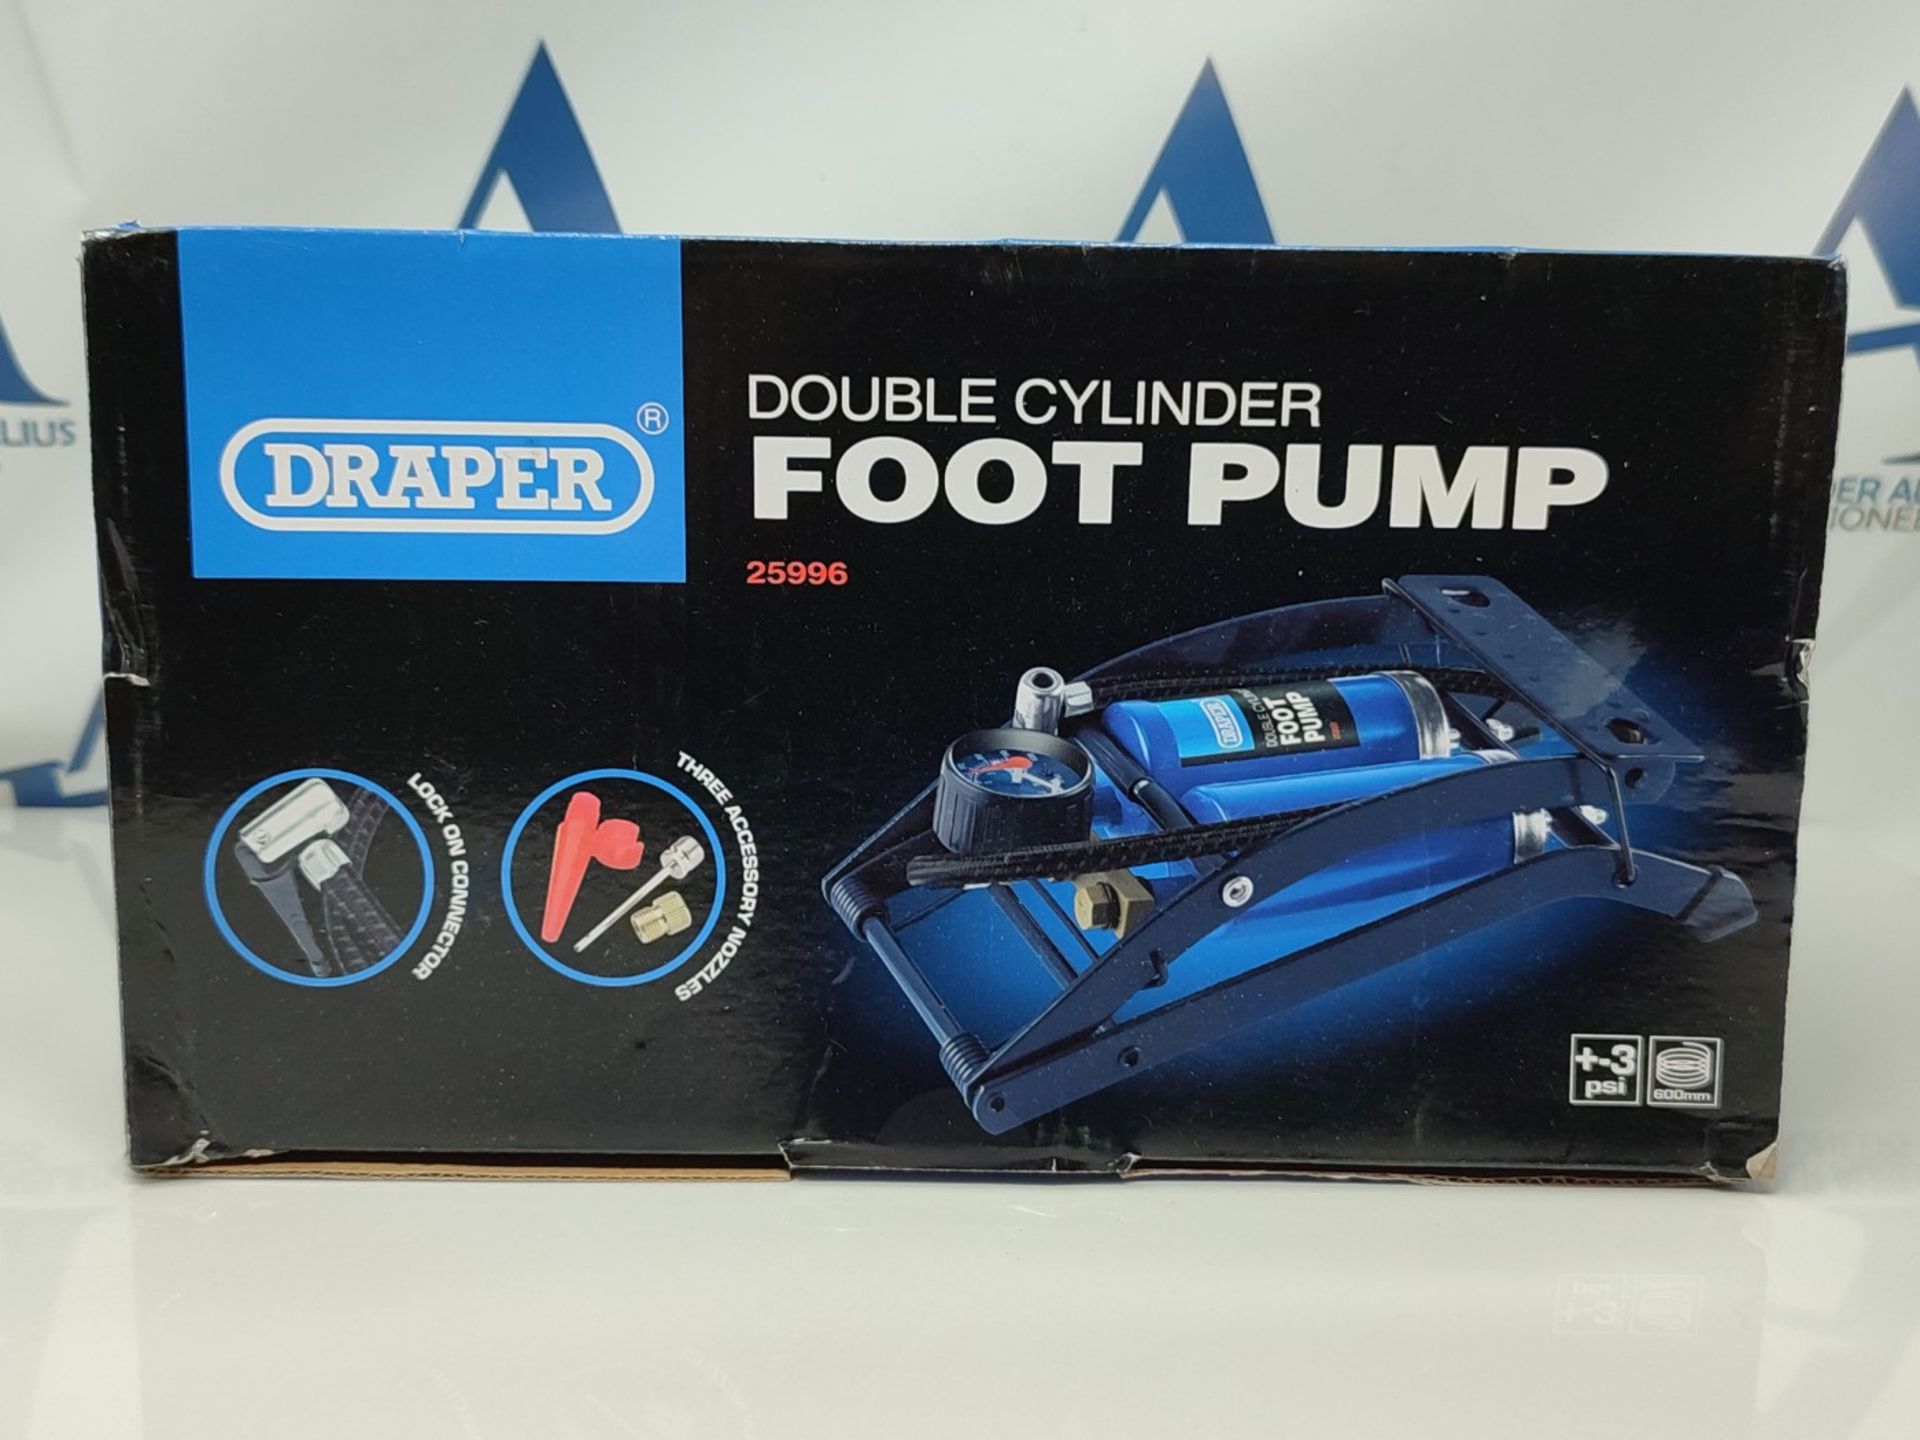 Draper Double-Cylinder Foot Pump with Pressure Gauge & Accessories - 25996 - Manual In - Image 2 of 3